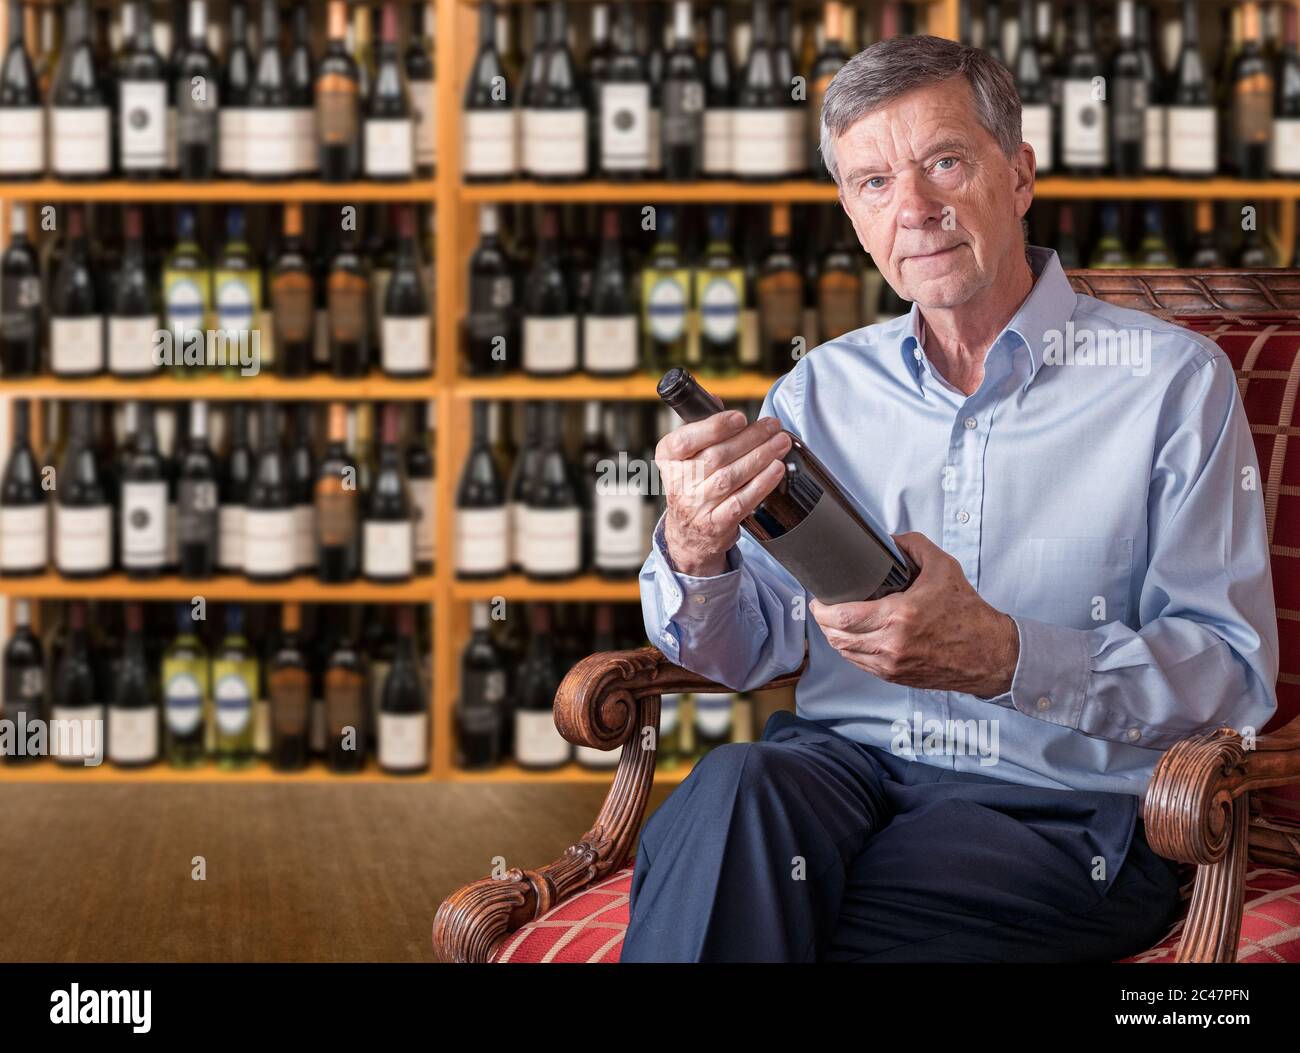 Friendly senior retired man examining a wine bottle label while seated in front of shelves in his wine cellar Stock Photo